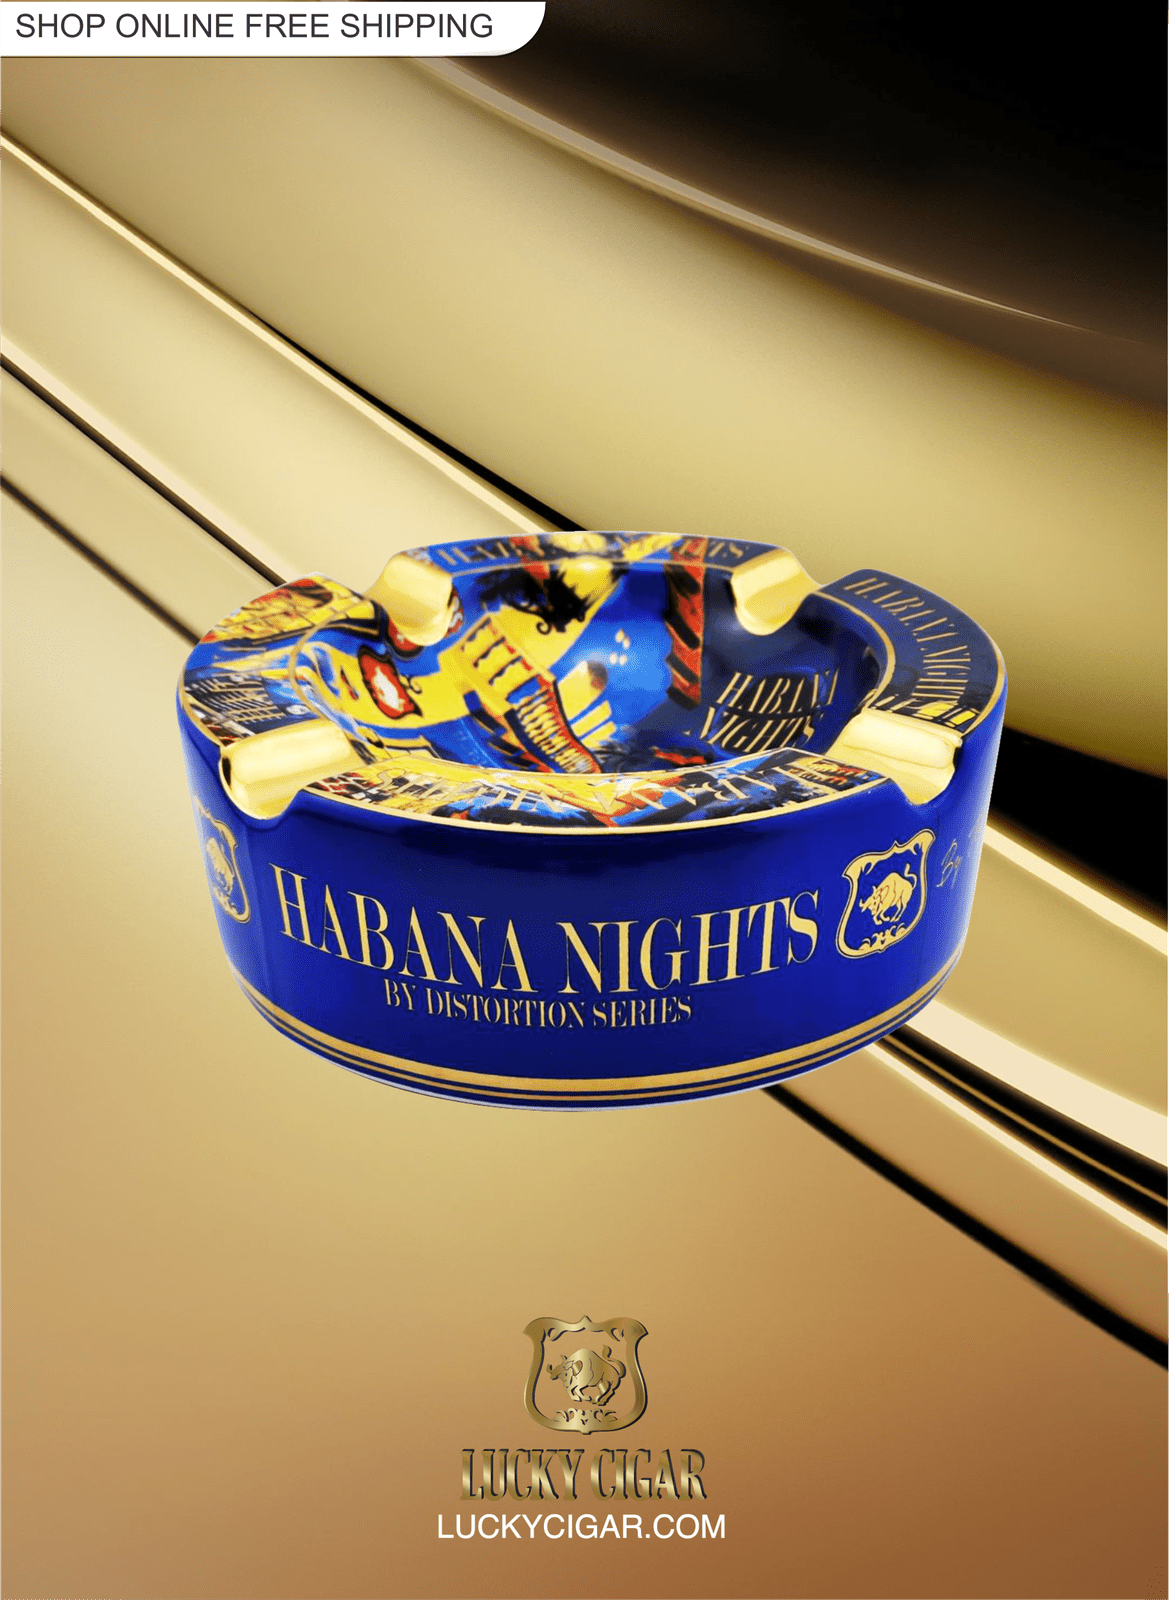 Limited Edition: Habana Nights Accessories by Lucky Cigar Ceramic Ashtray